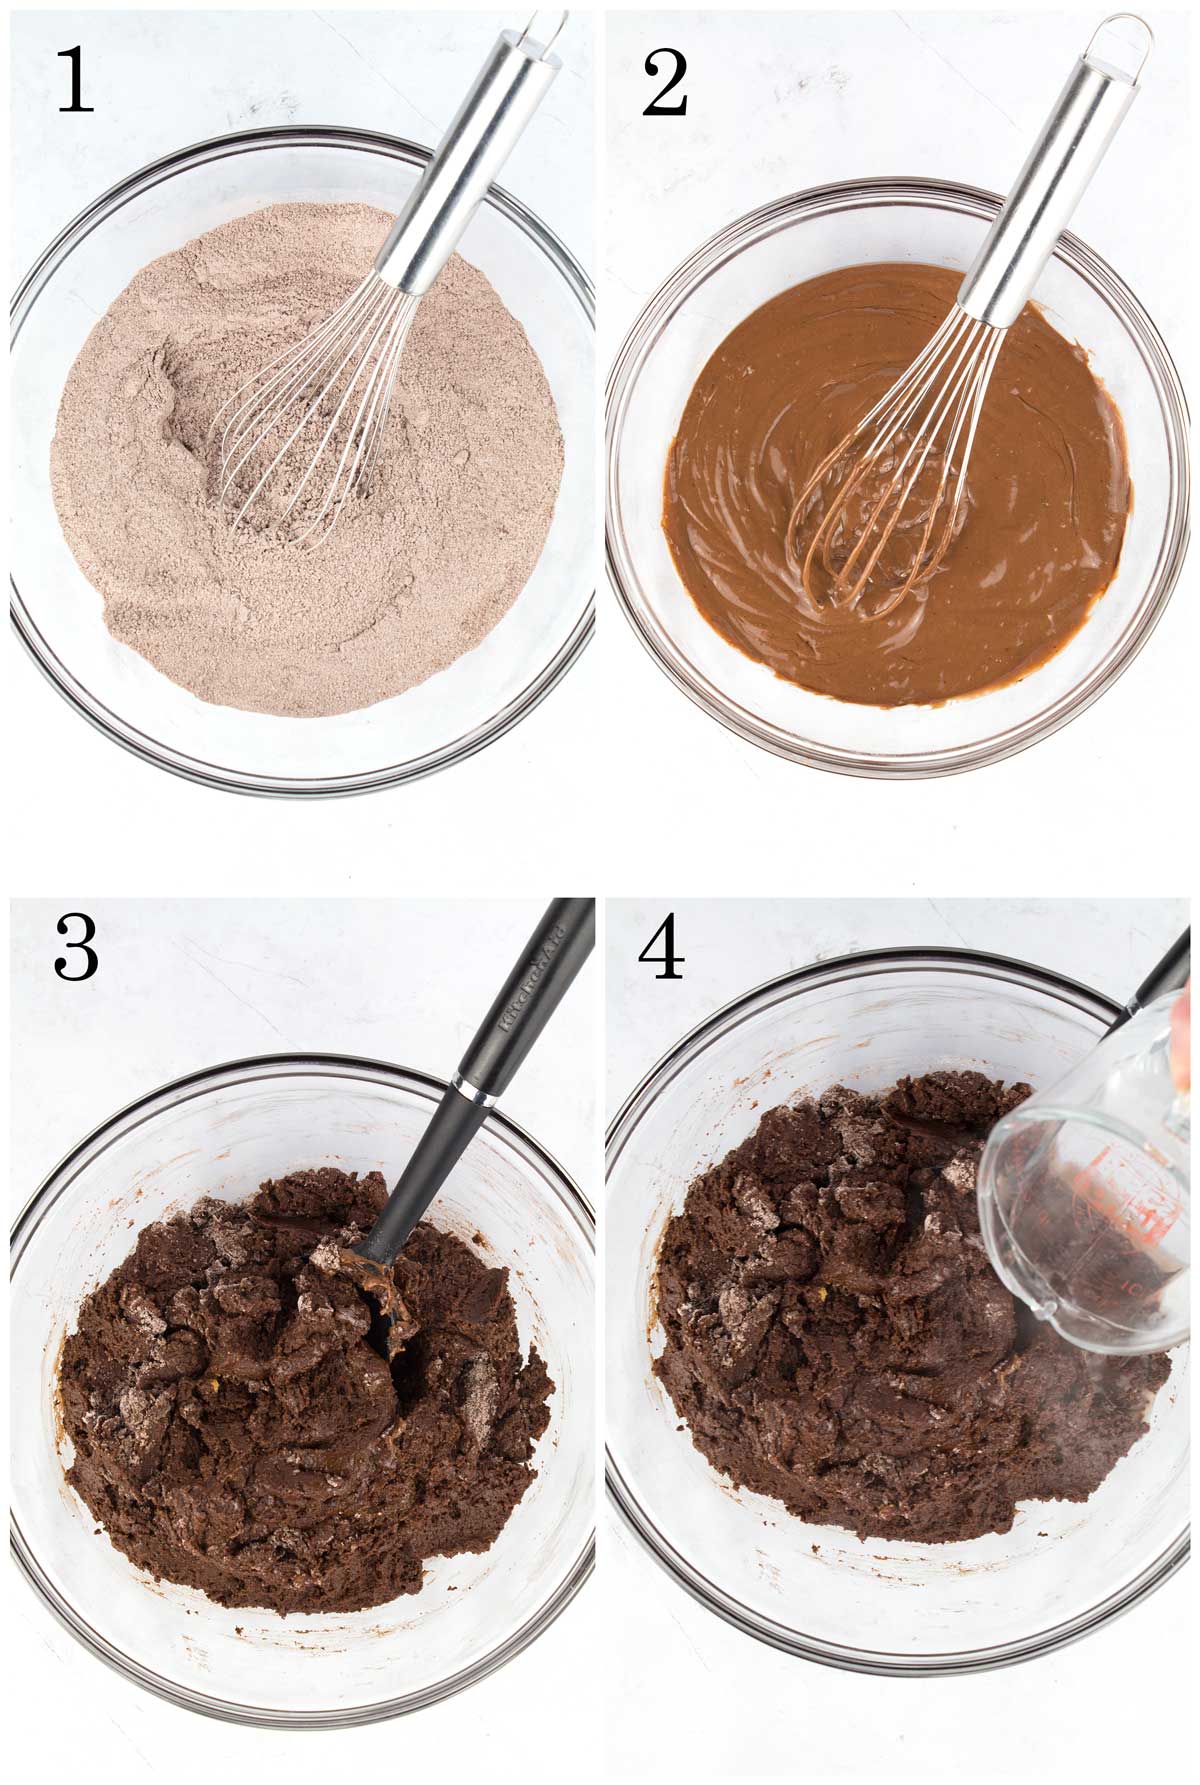 Step-by-step instructions for how to make chocolate bread.